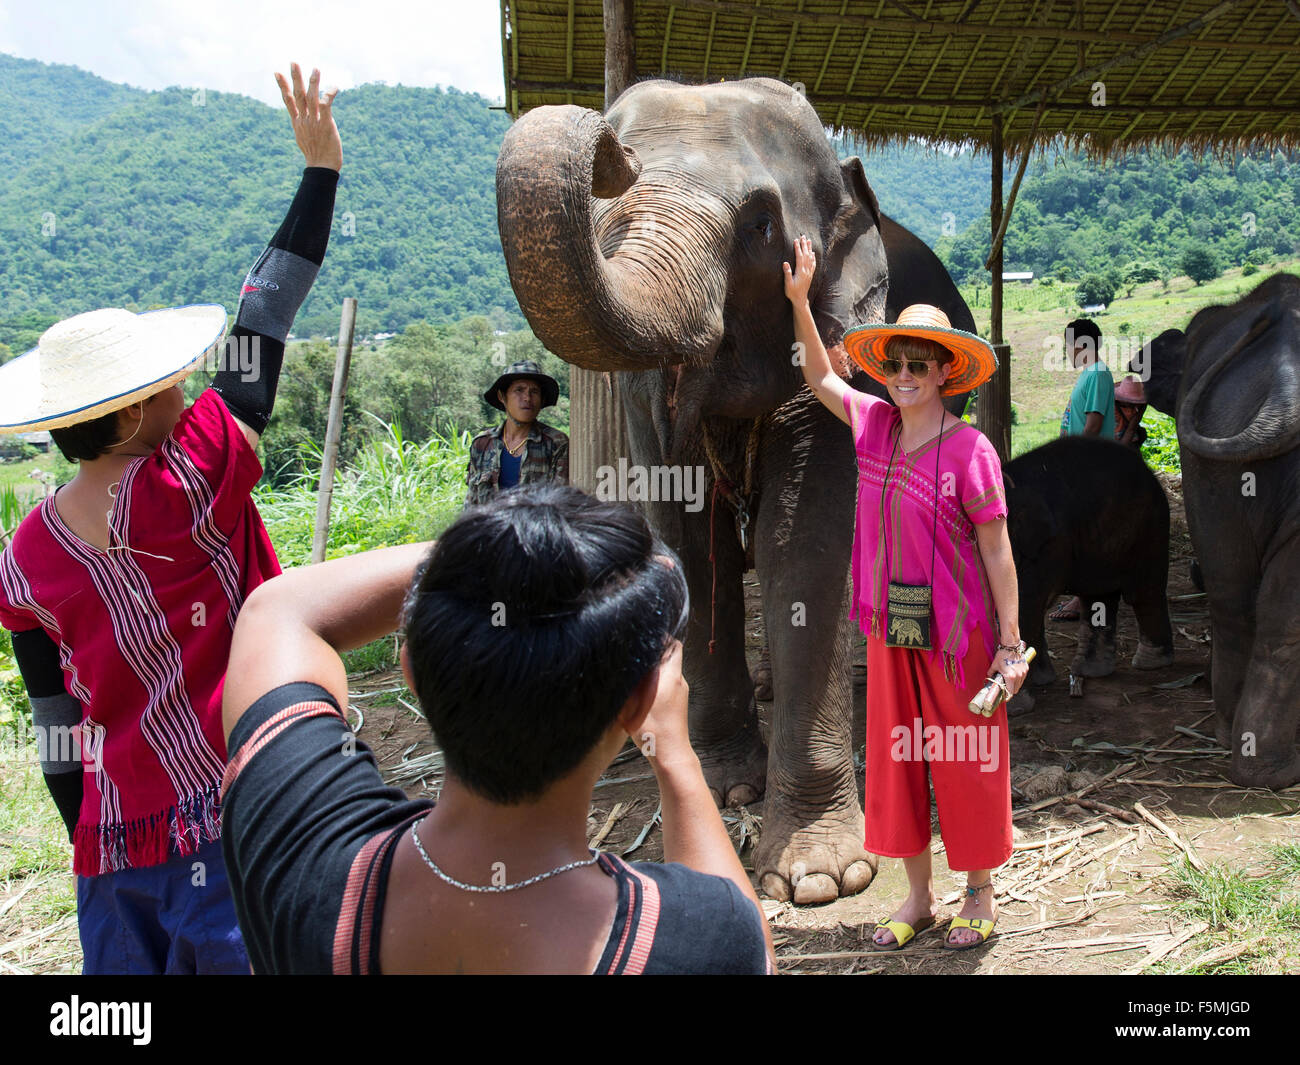 Tourist at an elephant sanctuary in Thailand Stock Photo